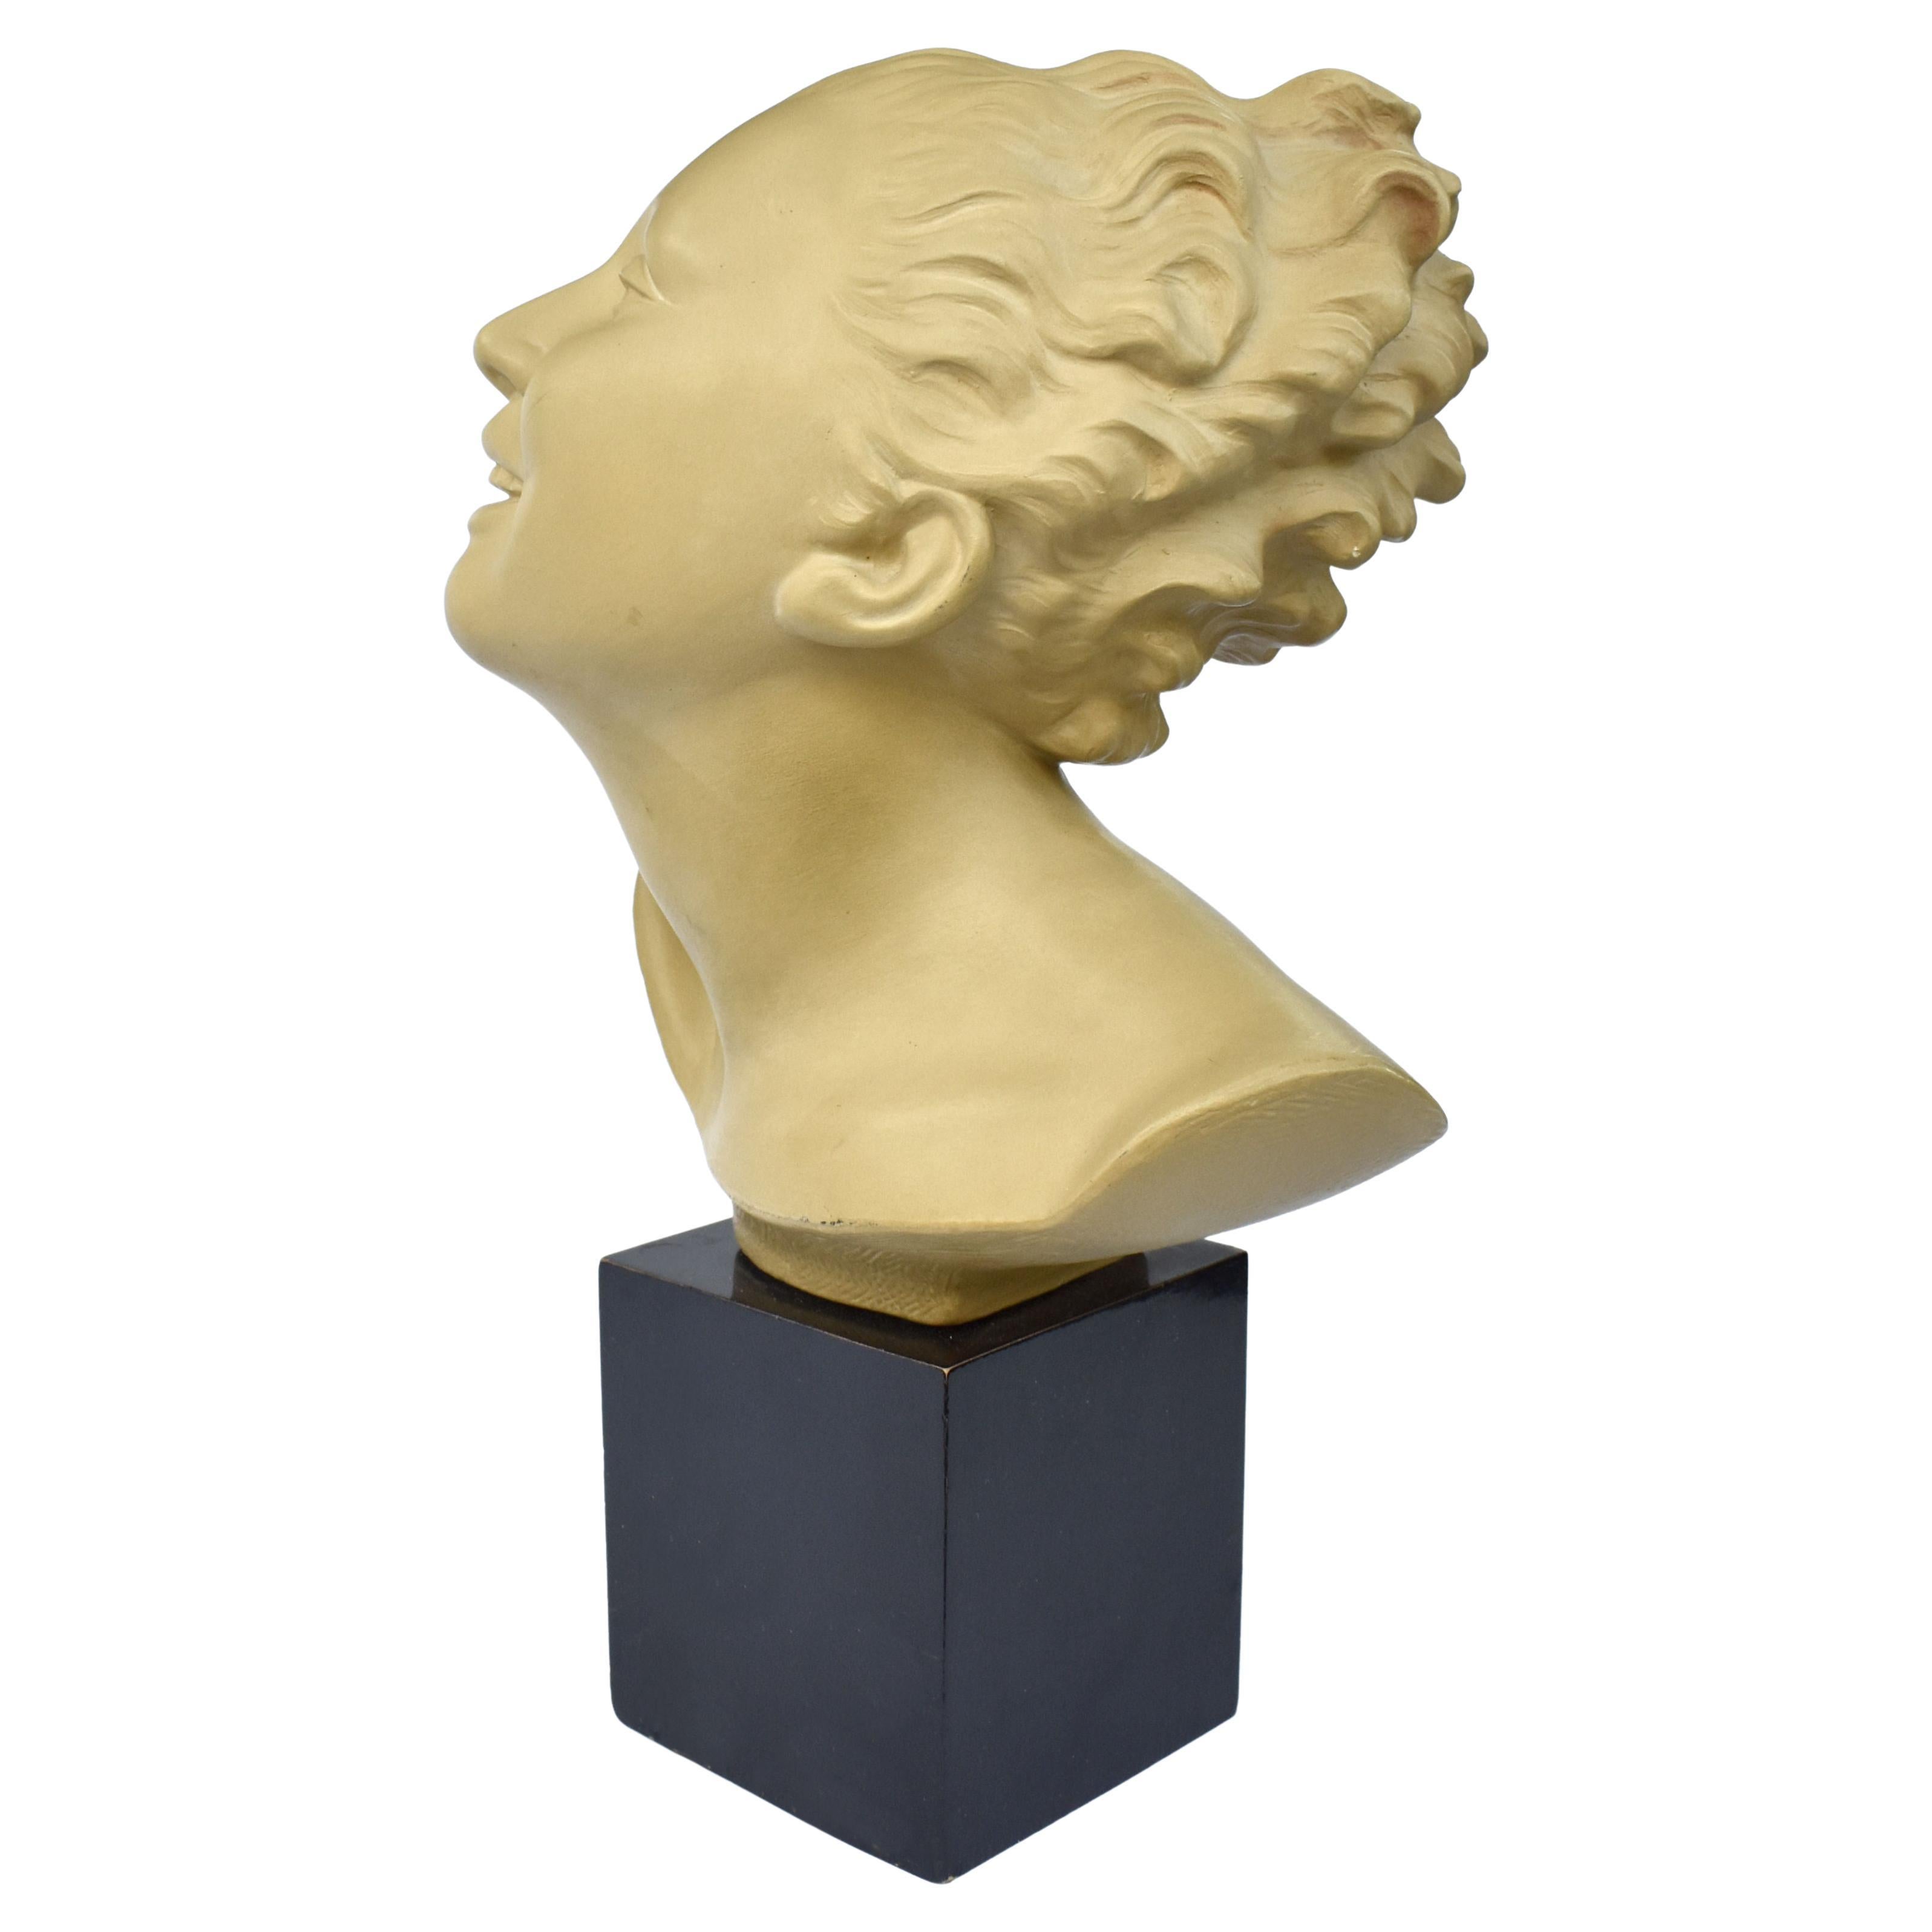 Art Deco Bust On Stand, c1930 By Bohumil Rezl